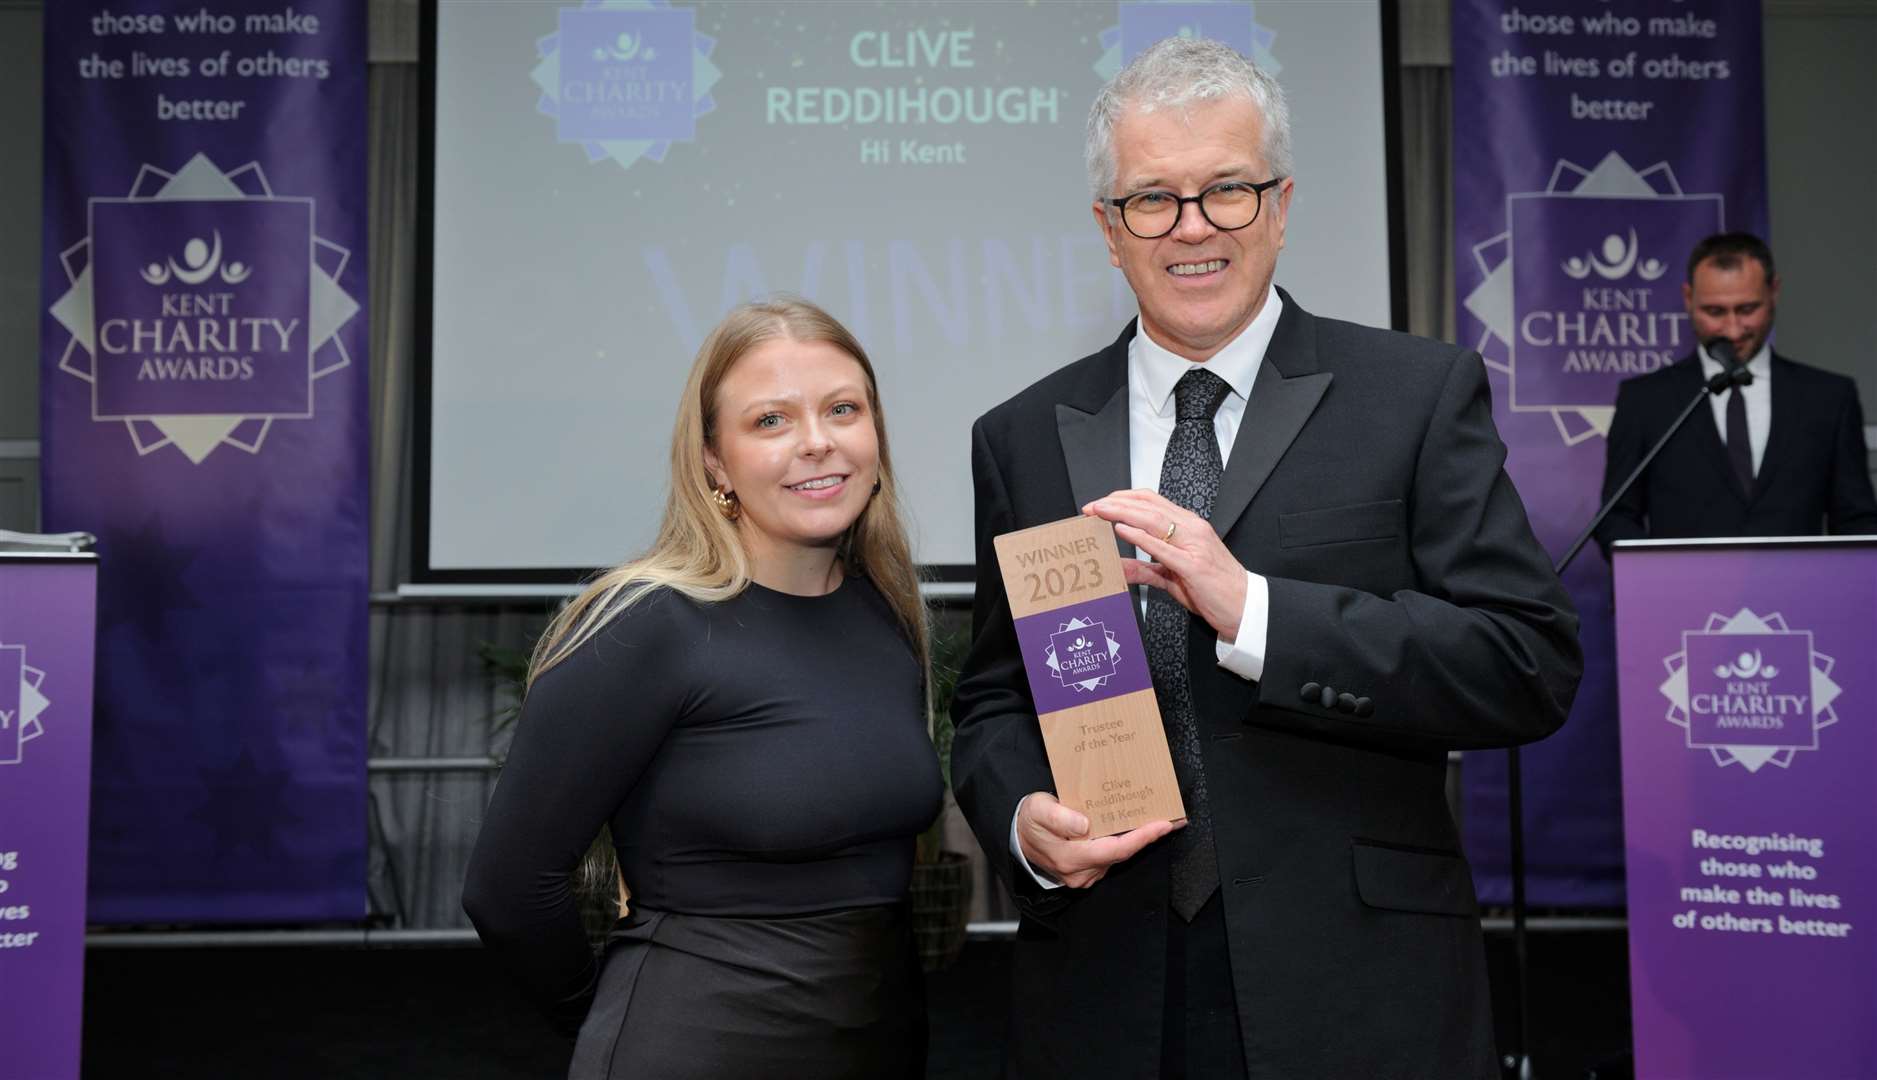 Clive Reddihough from Hi Kent received the Trustee of the Year award. Picture: Simon Hildrew